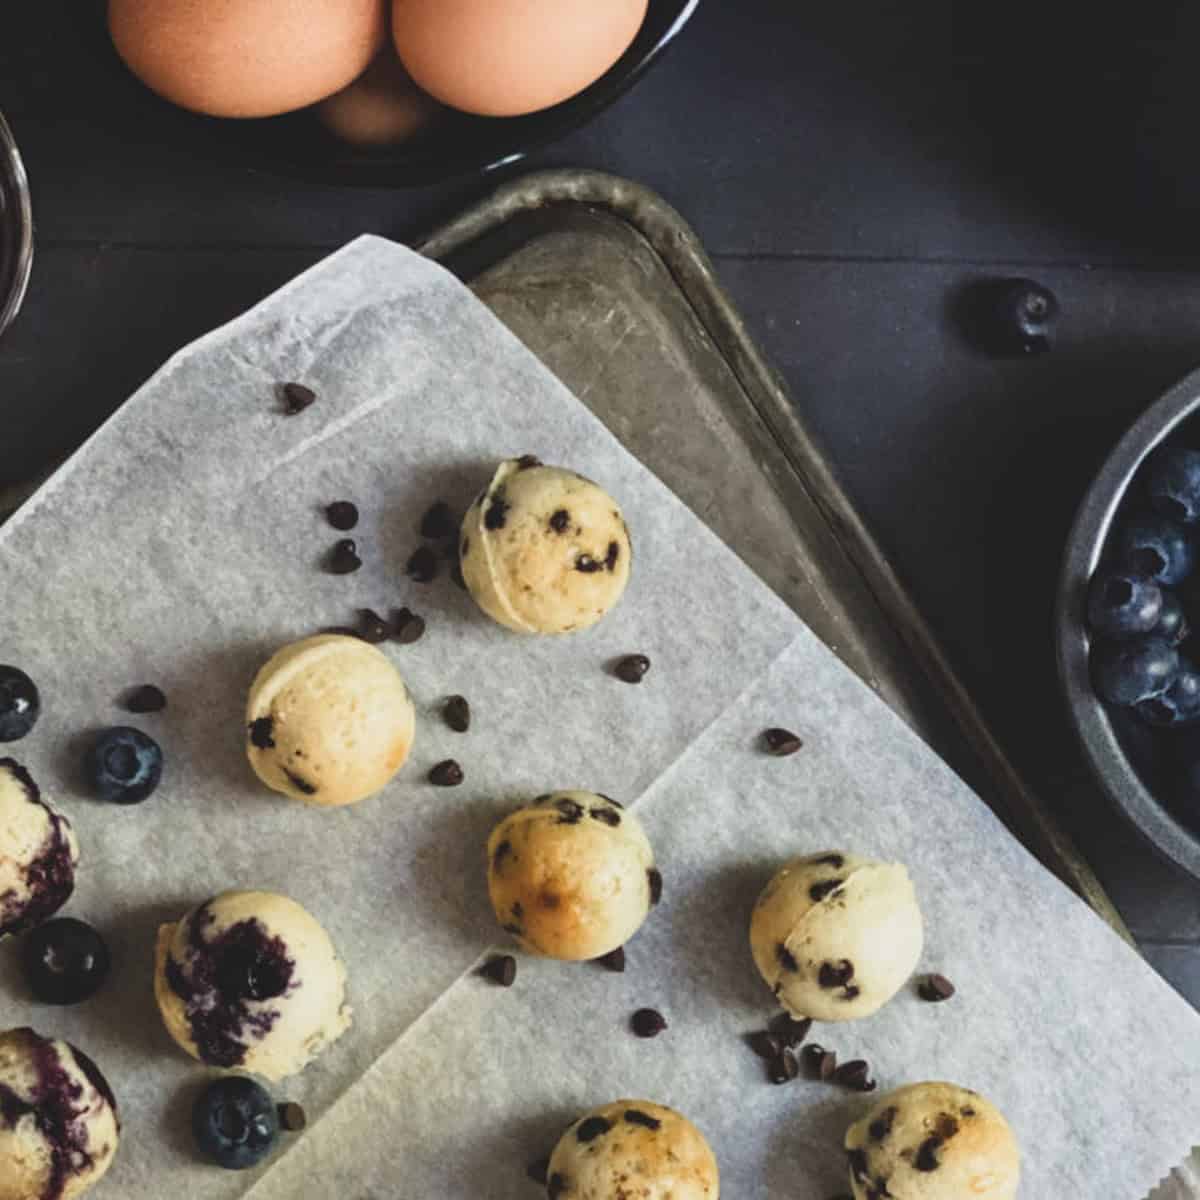 A tray of blueberry pancake bites recipe with chocolate chips on a wooden table.